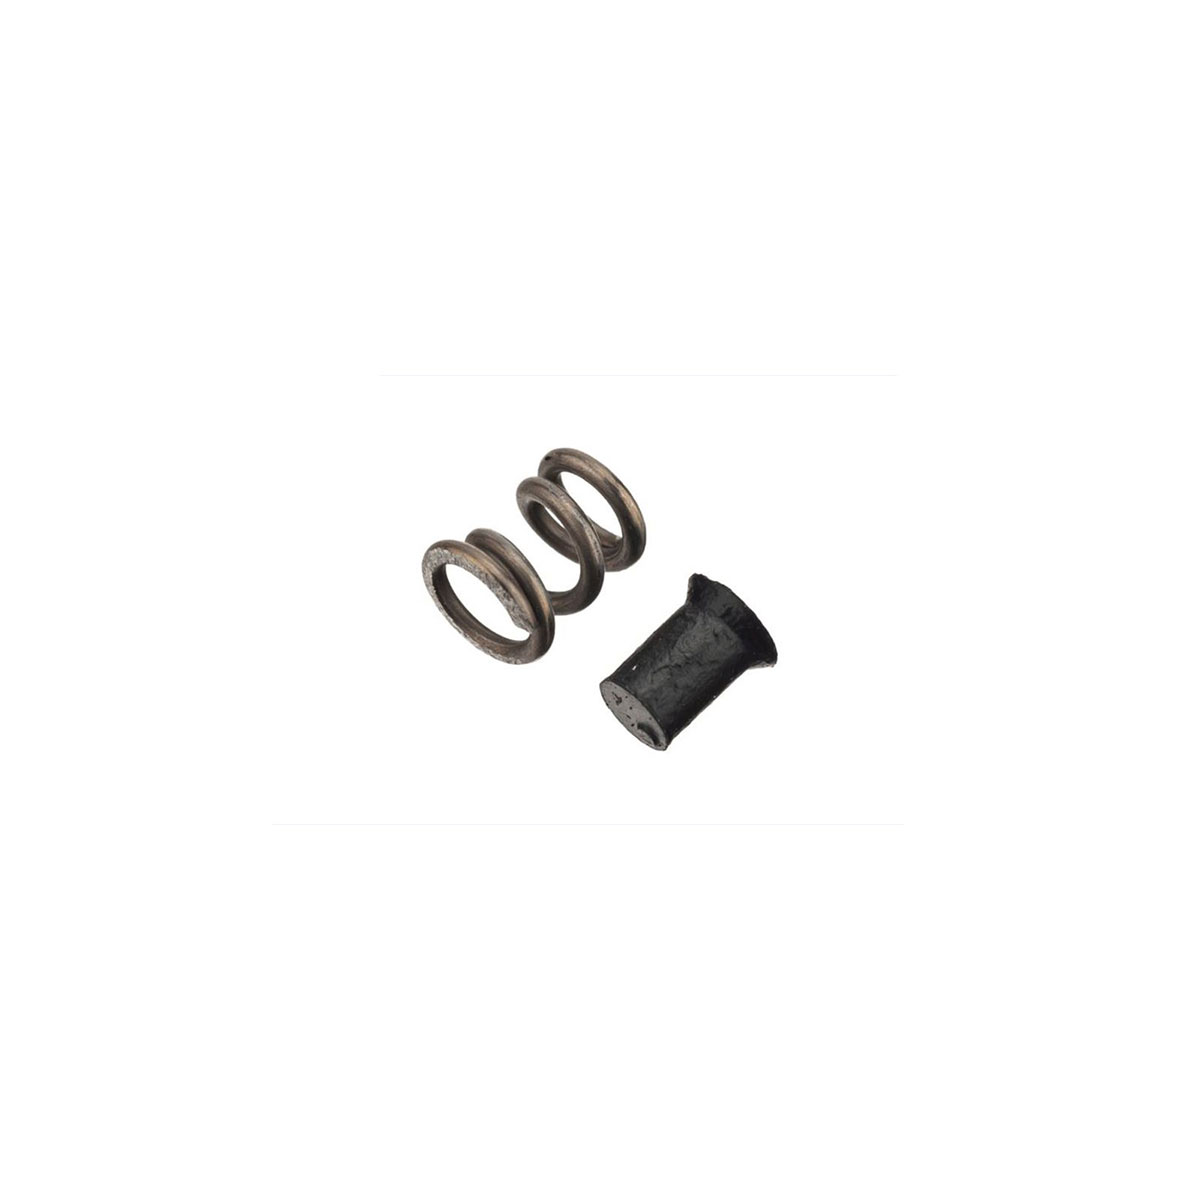 CMMG - AR-15 EXTRACTOR SPRING AND BUFFER